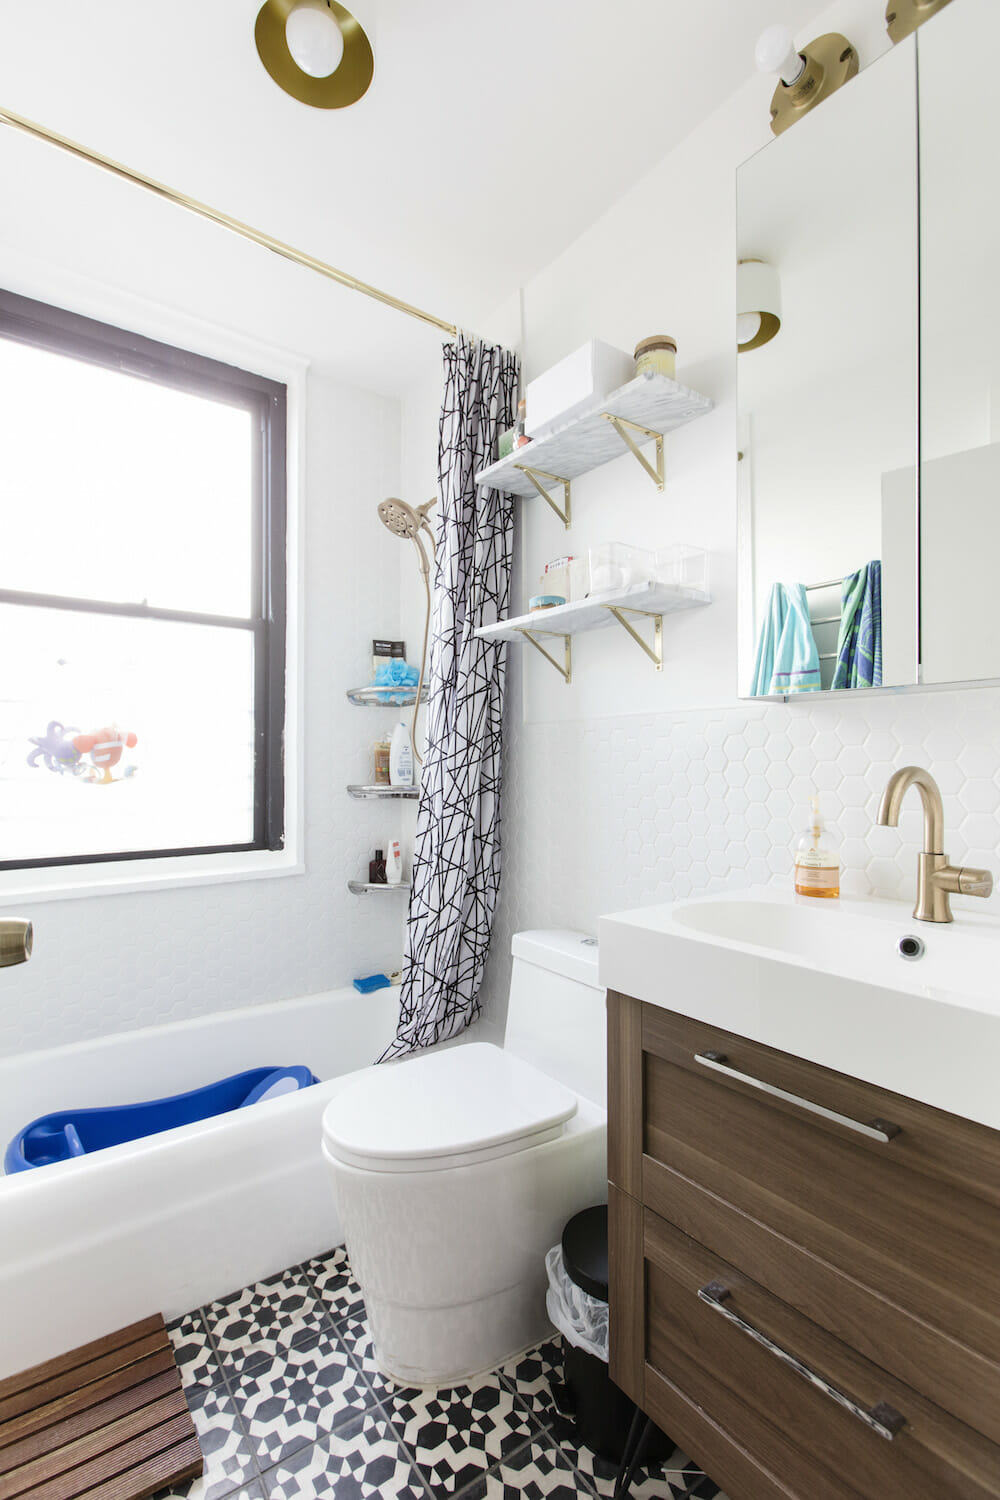 Small-Bathroom Storage Ideas That Maximize Every Inch